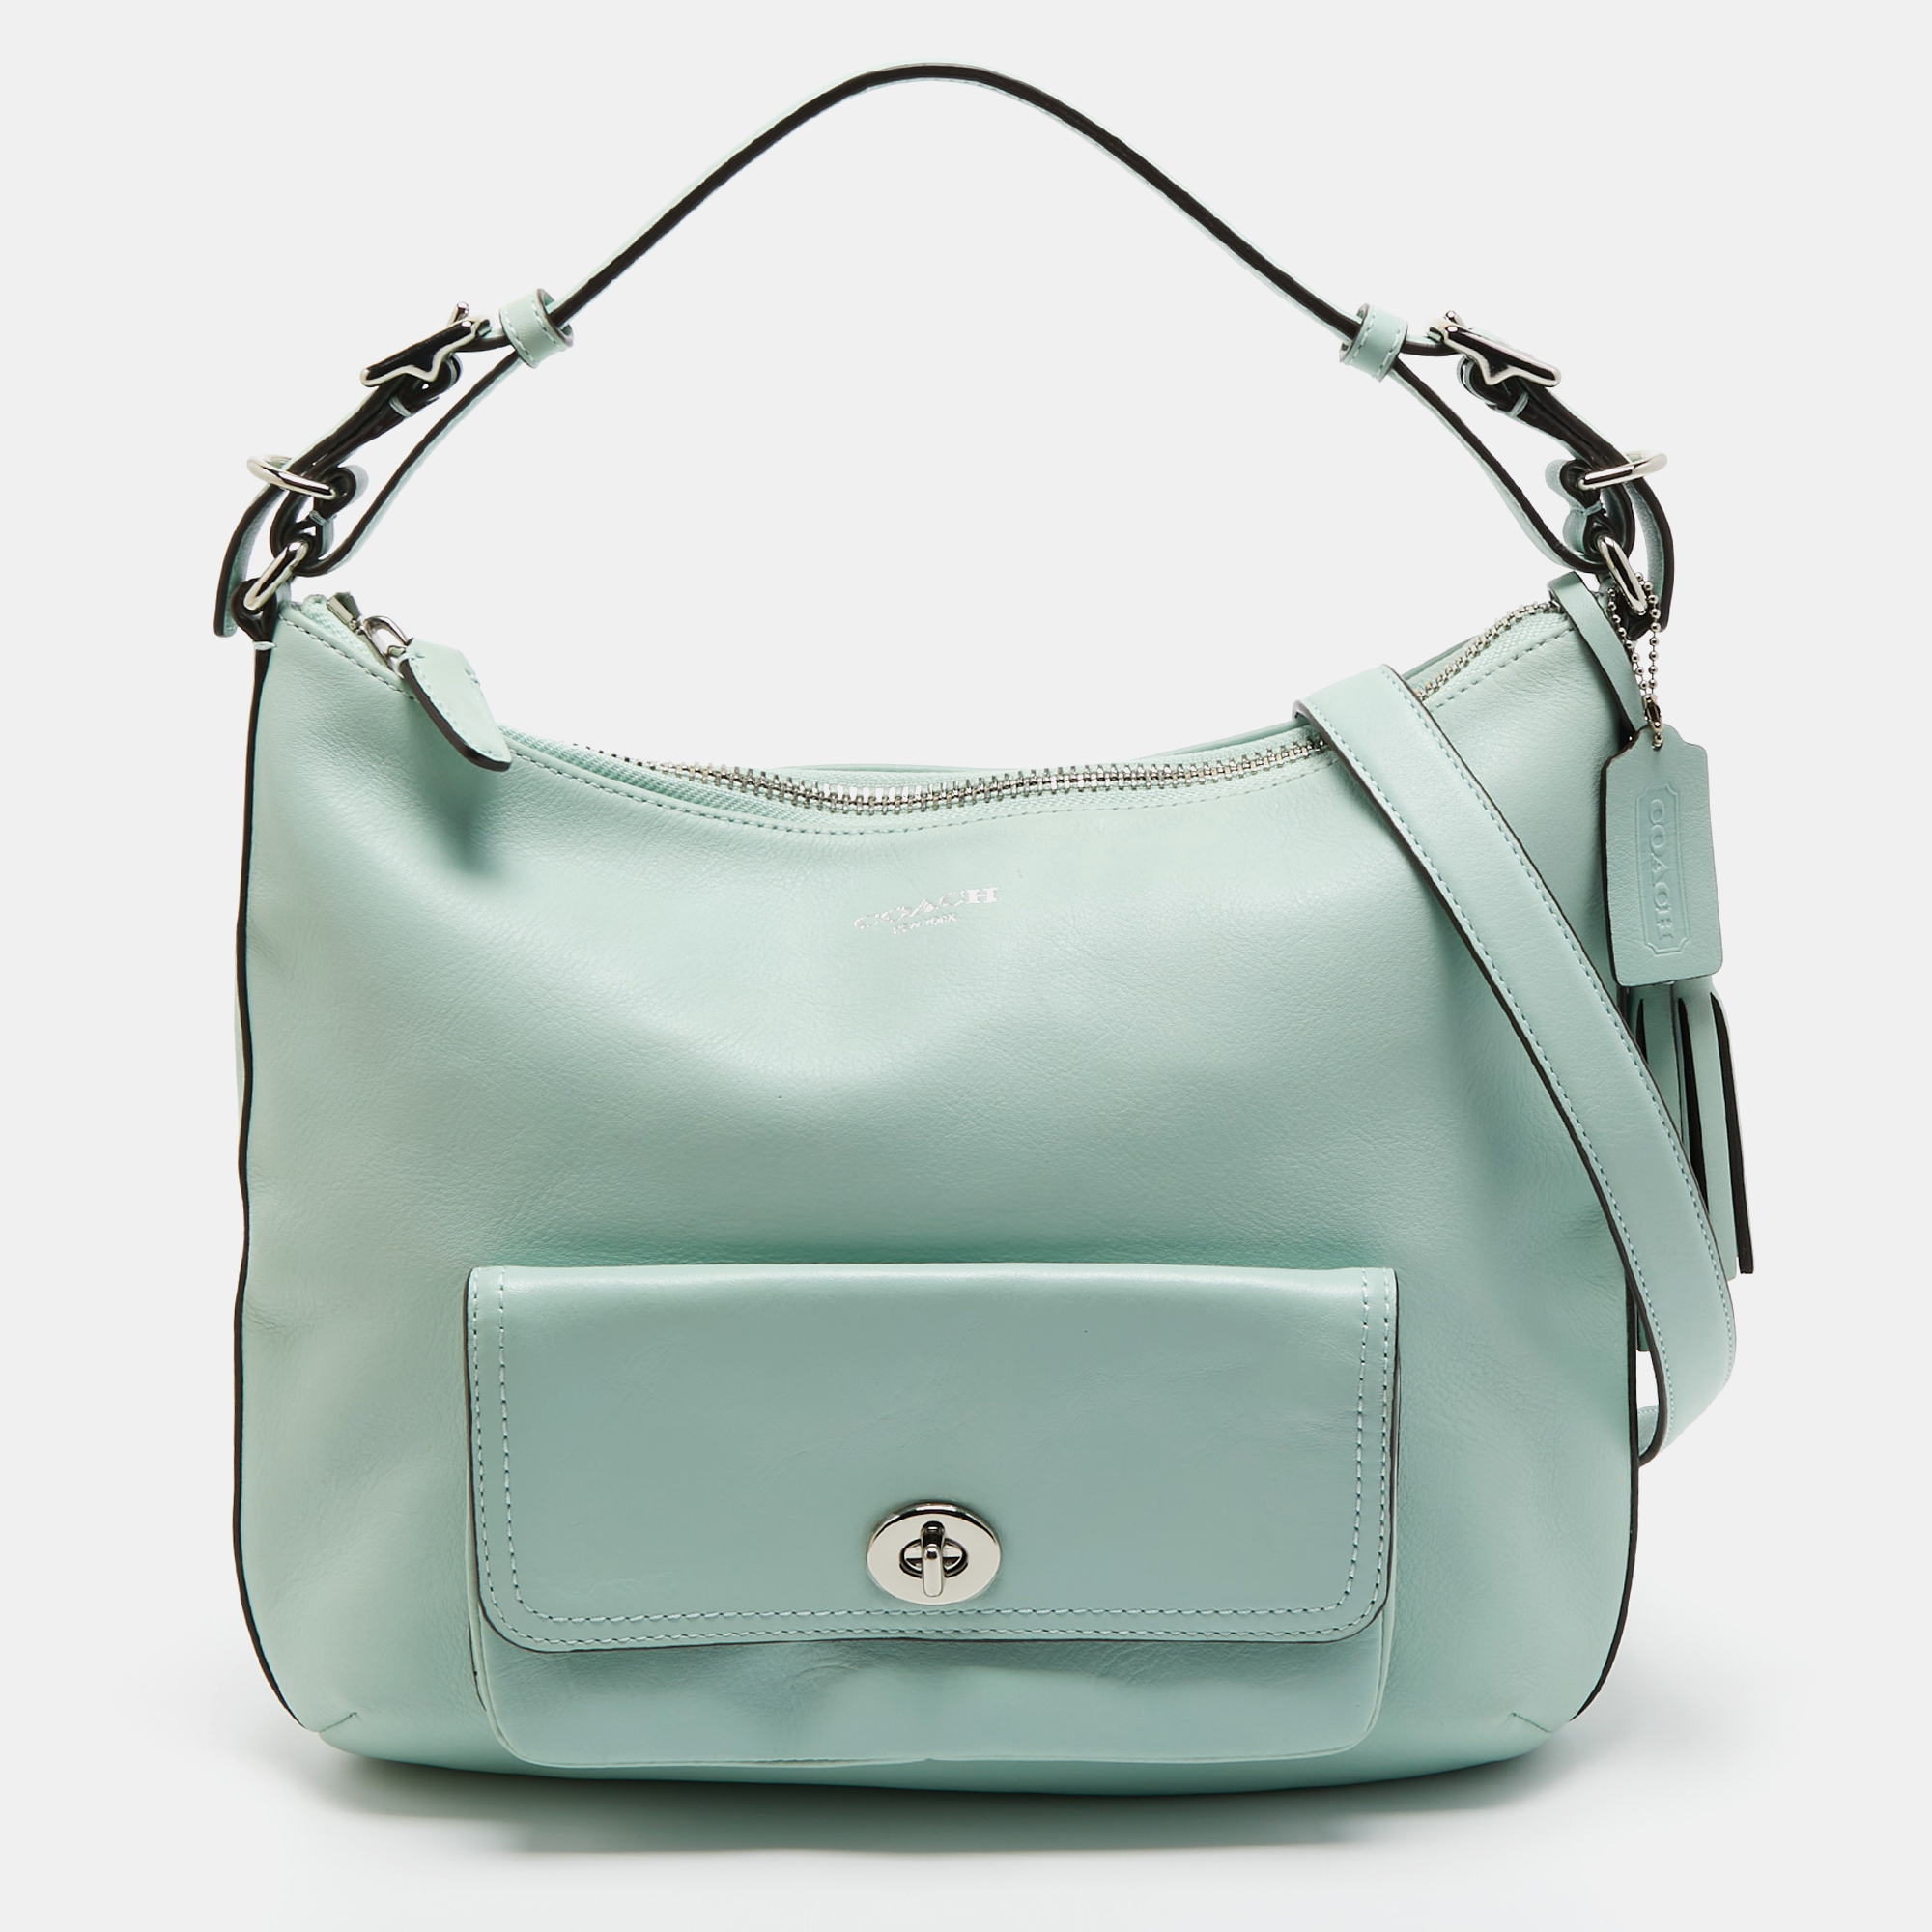 Pre-owned Coach Mint Green Leather Legacy Courtney Hobo